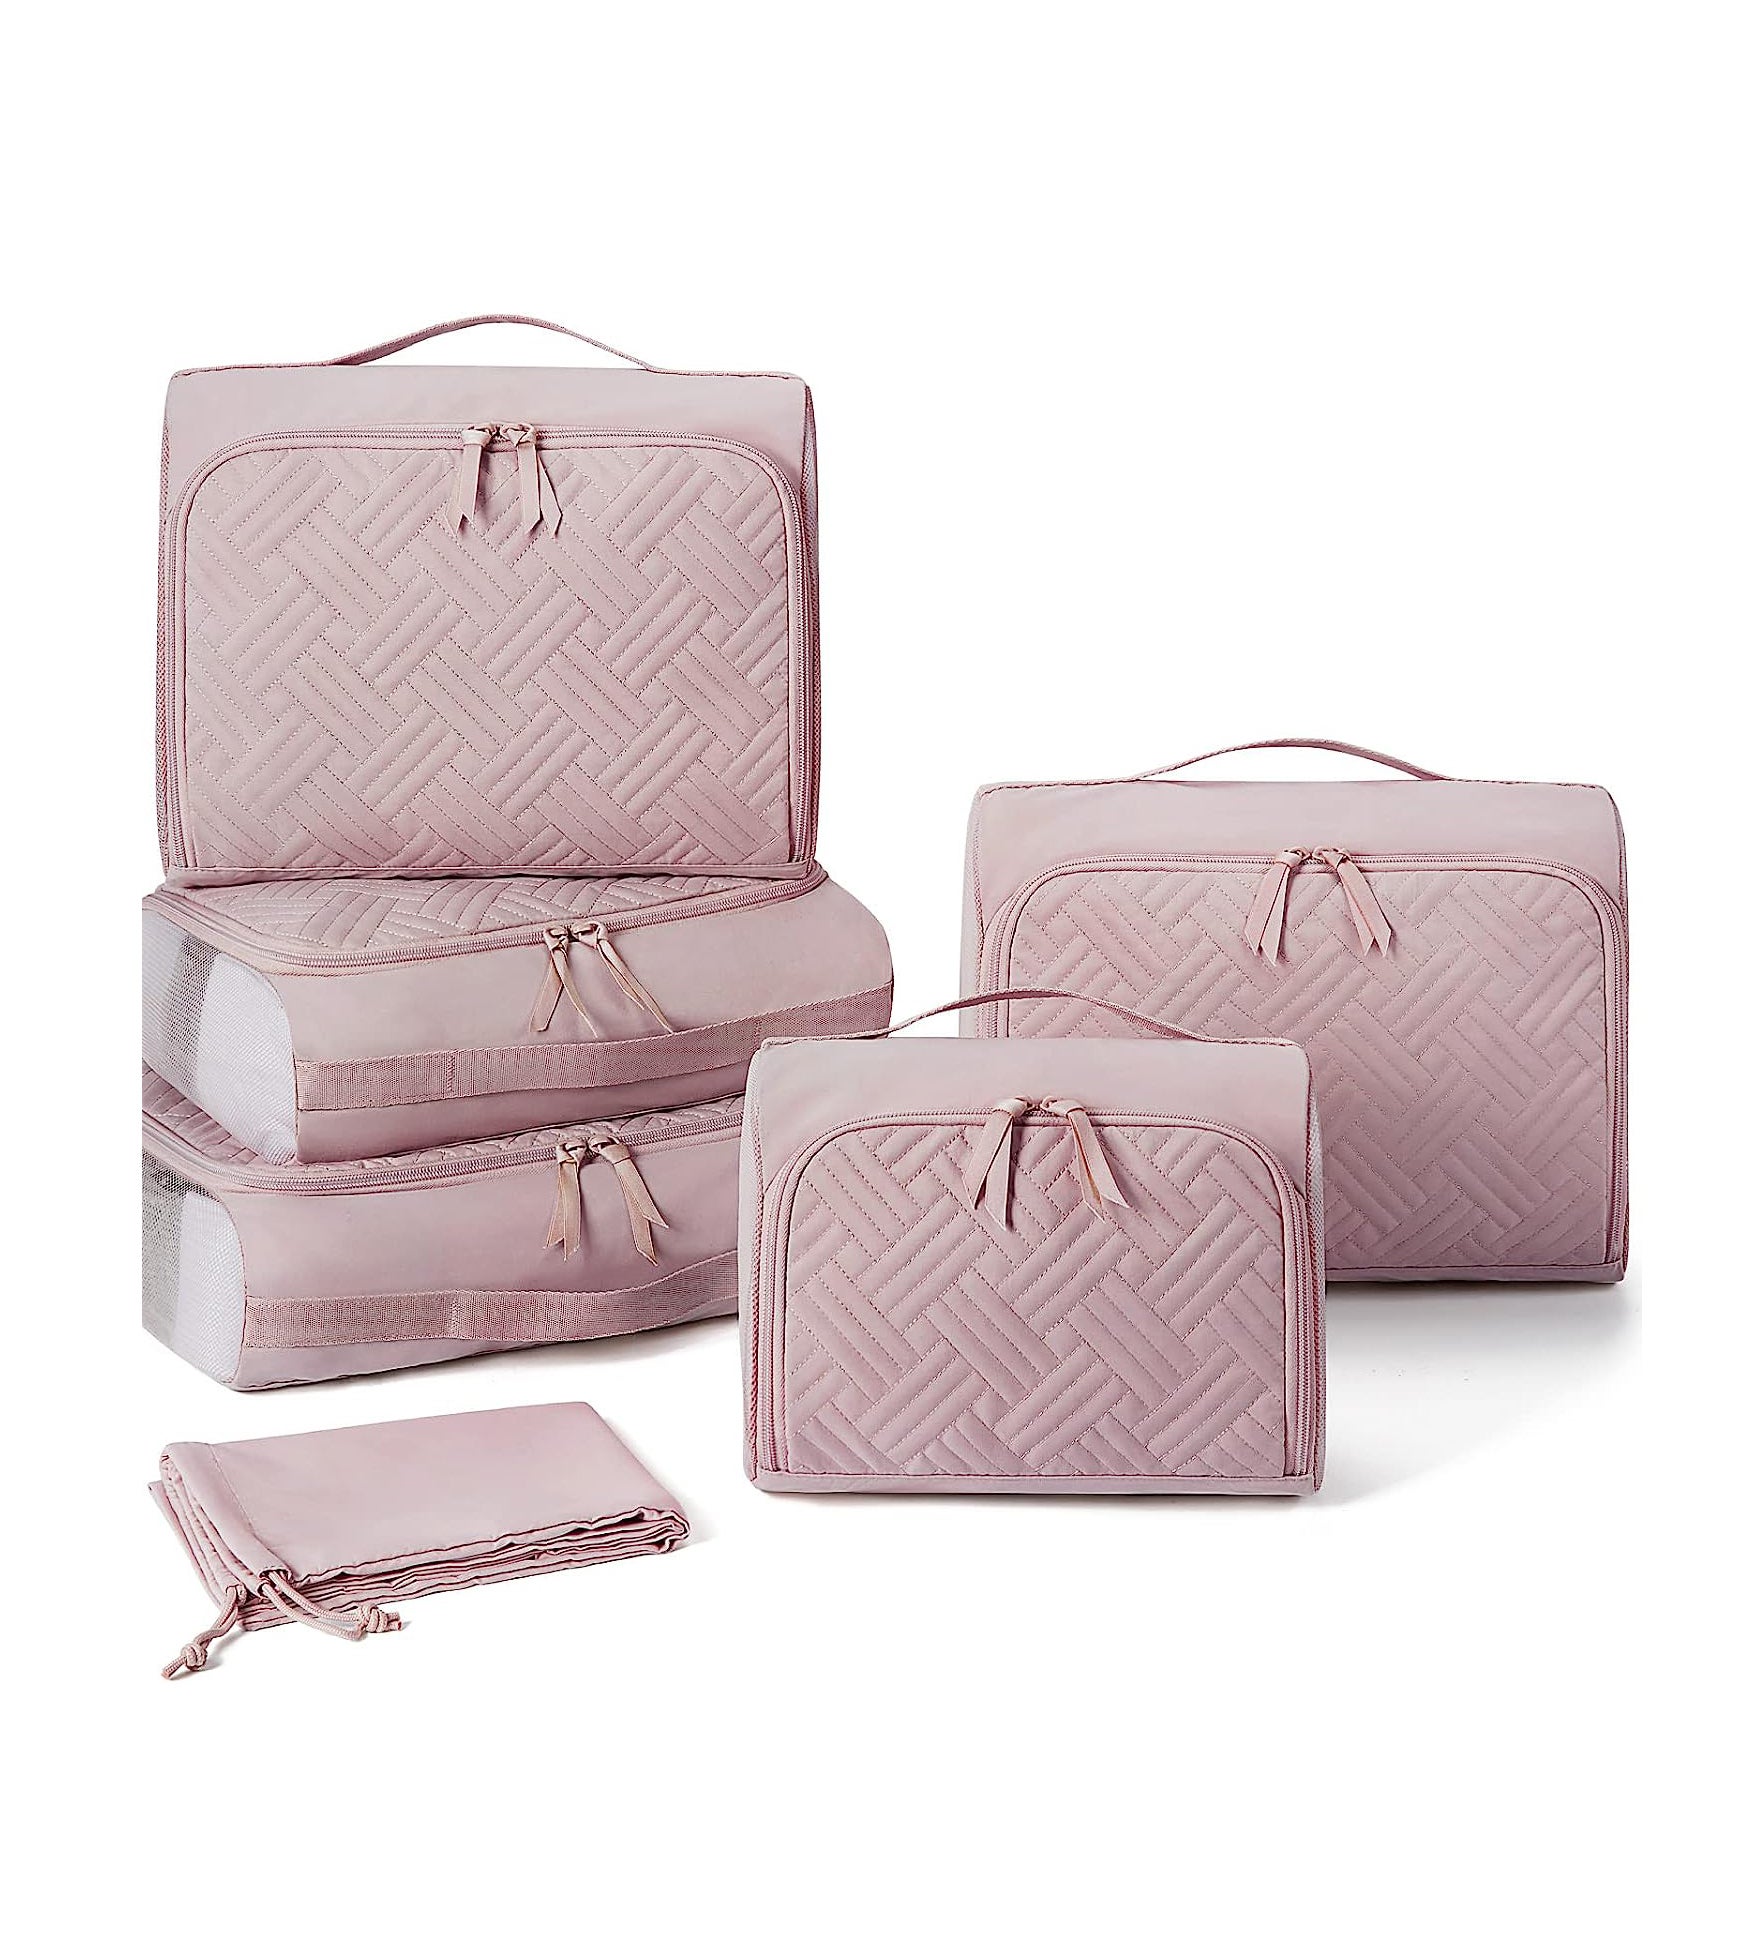 Packing Cubes - Set of 3 by Bag-all - Pink